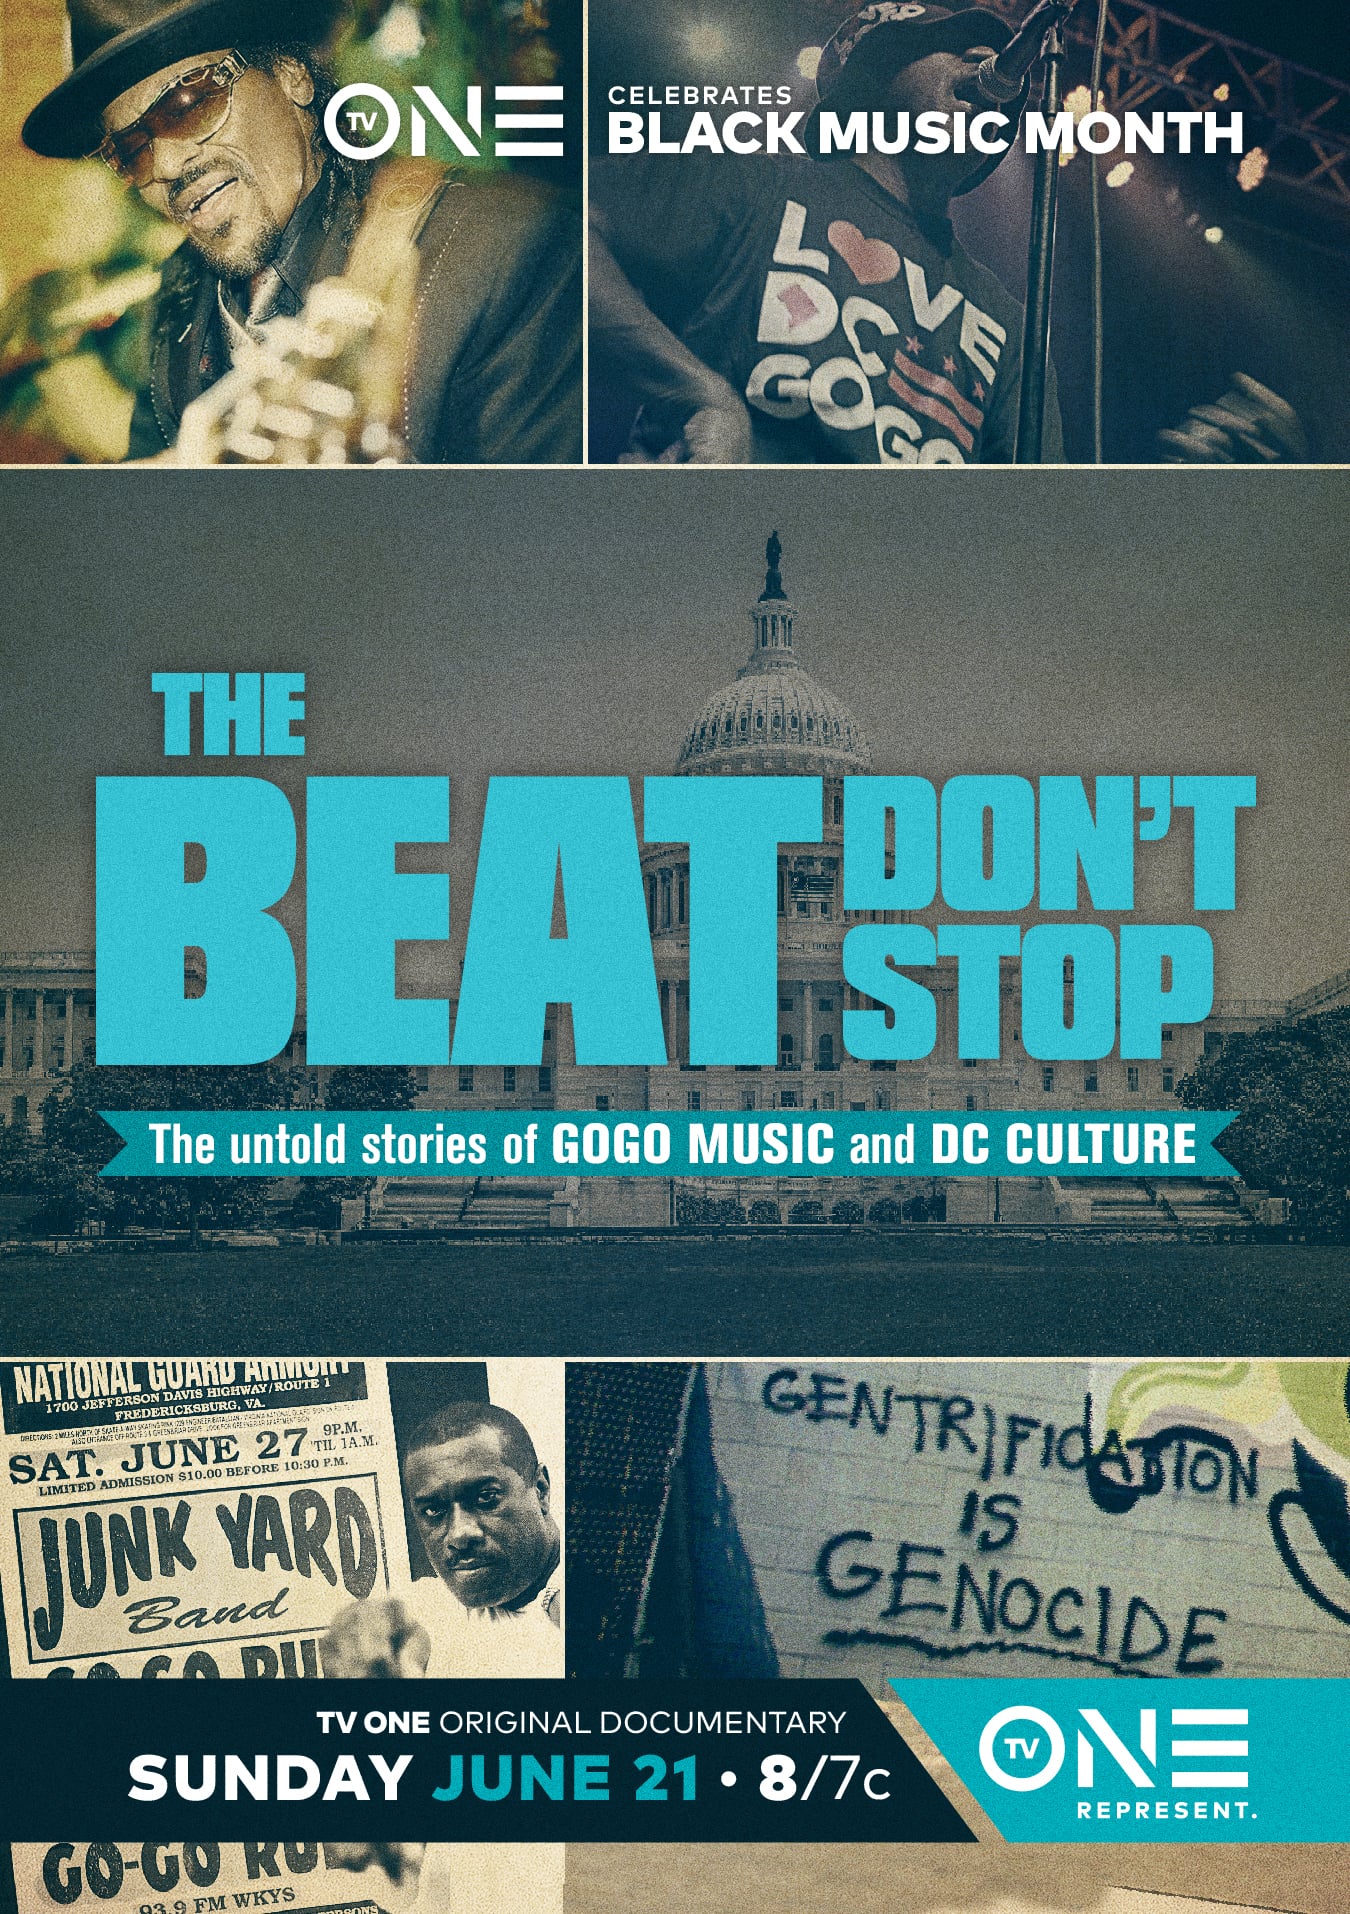 Army guide bronze EUR: 'The Beat Don't Stop' Go-Go Music Doc on Vimeo